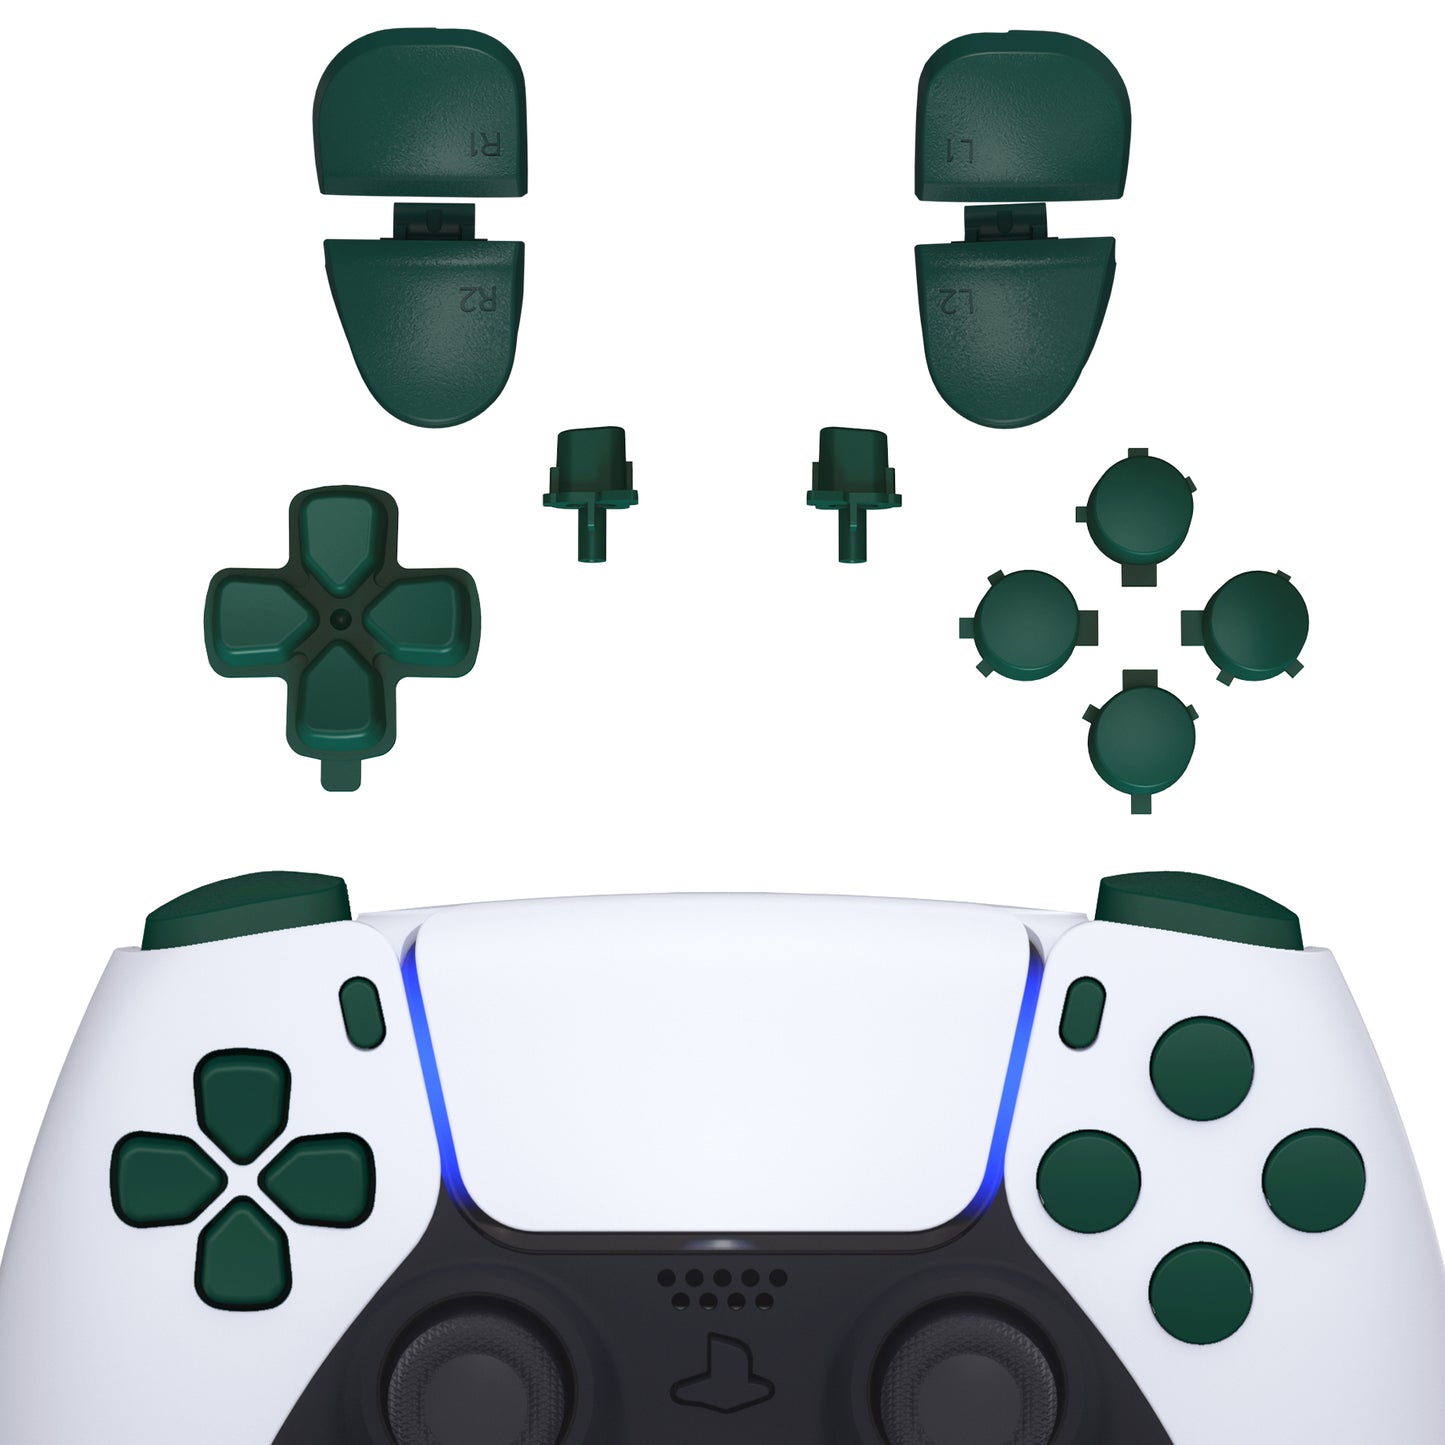 eXtremeRate Retail Replacement D-pad R1 L1 R2 L2 Triggers Share Options Face Buttons, Racing Green Full Set Buttons Compatible with ps5 Controller BDM-030 - JPF1016G3